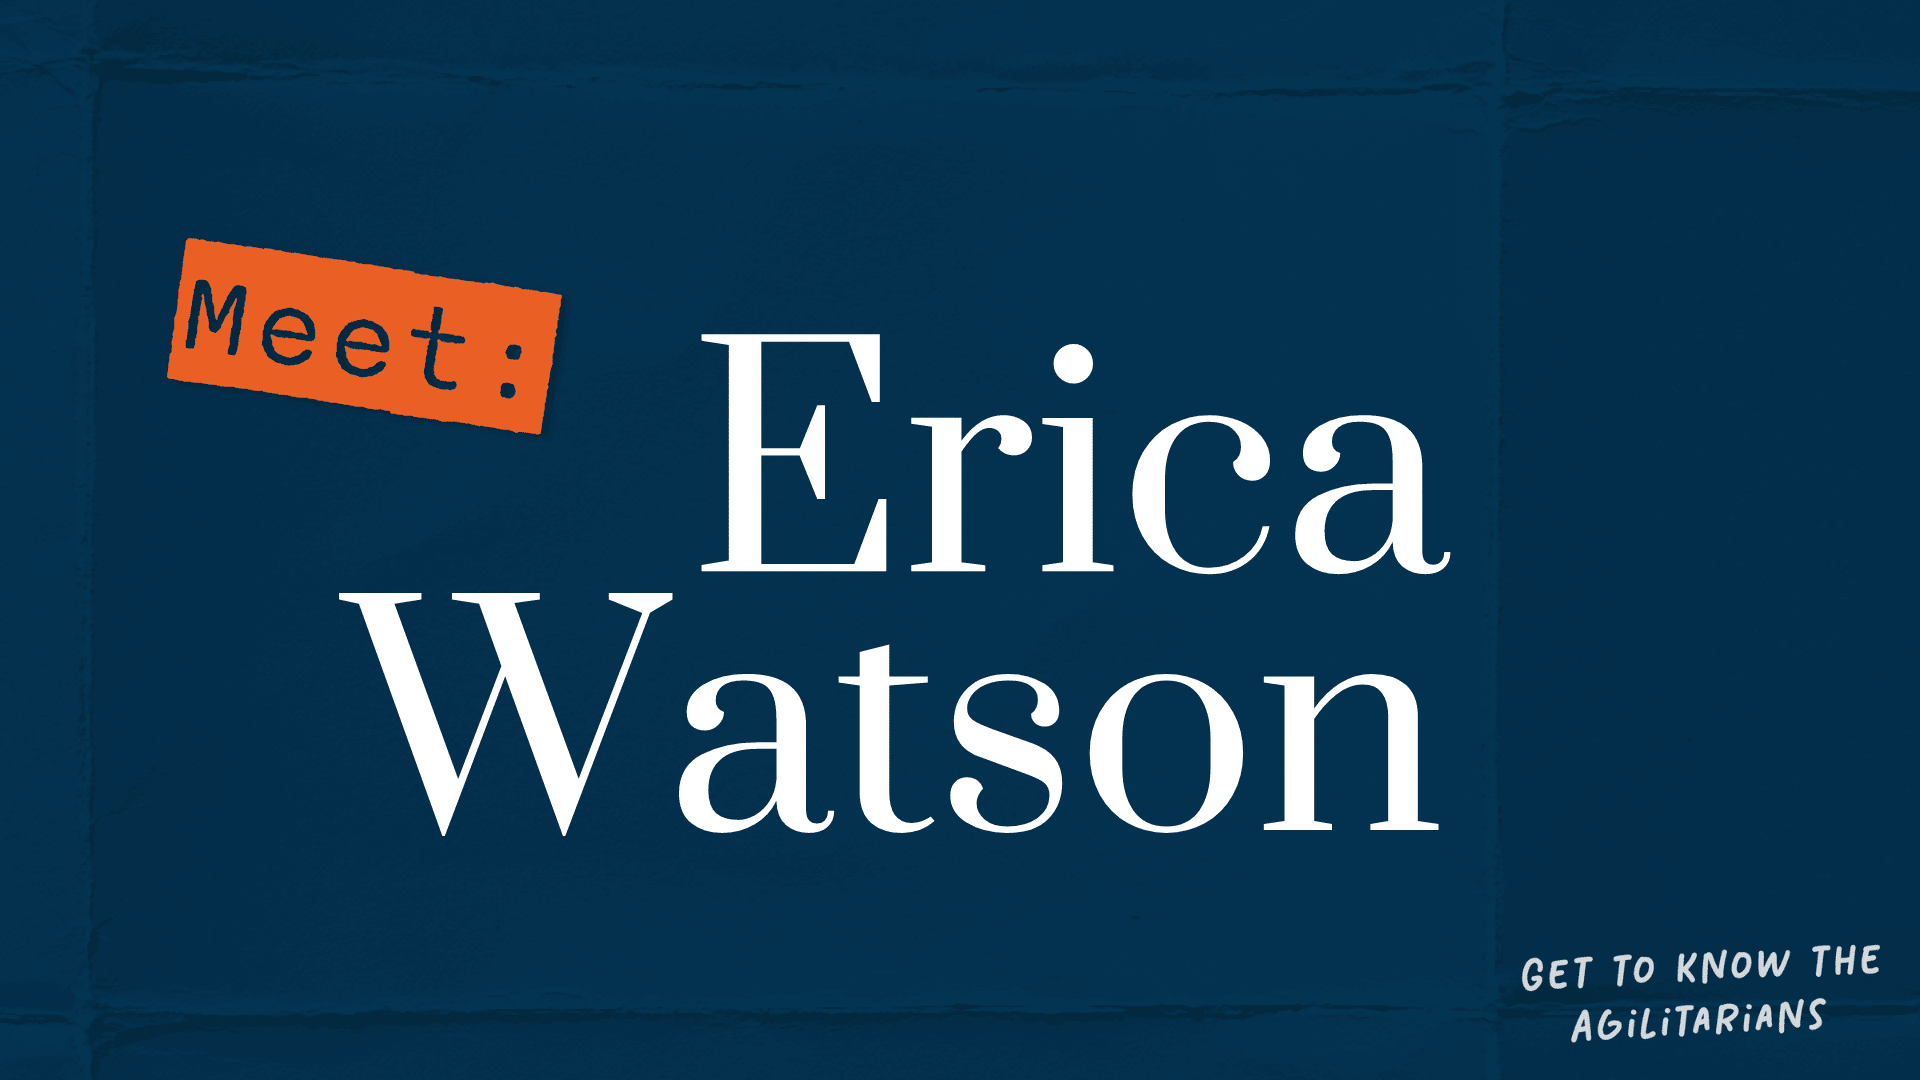 Get to know the Agilitarians: Meet Erica Watson